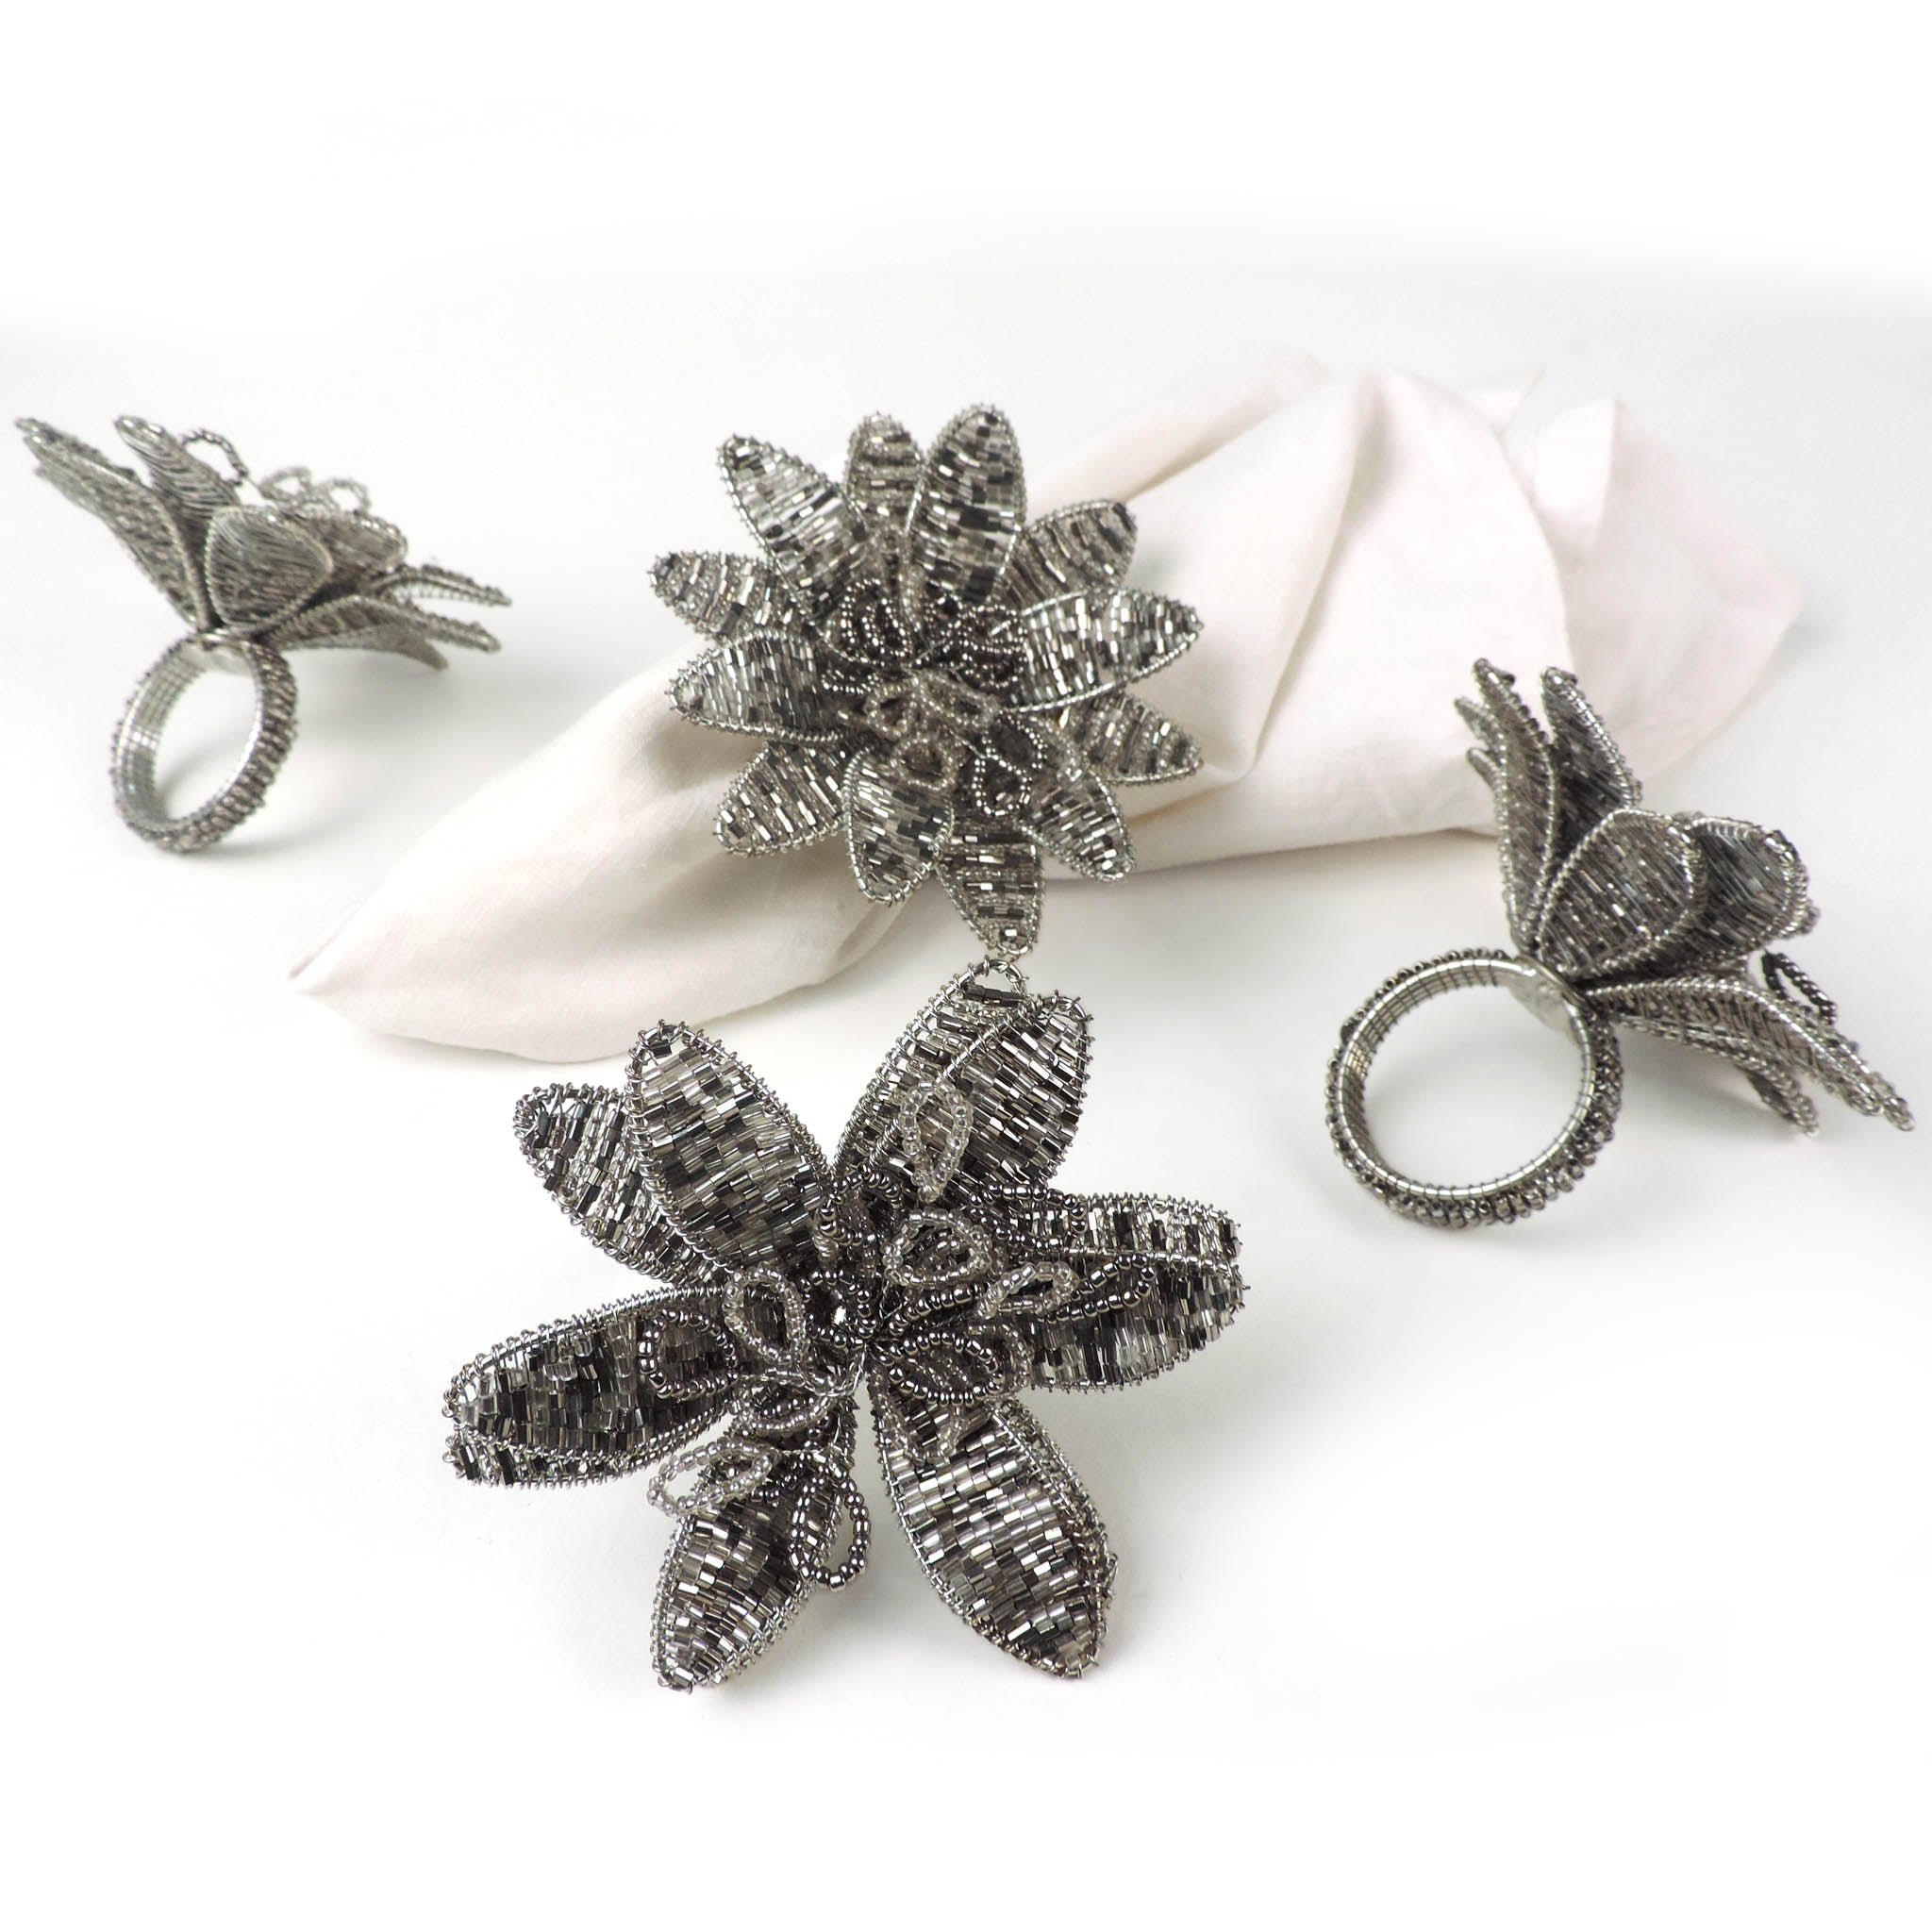 Gilded Lily Napkin Ring in Smoke Silver, Set of 4